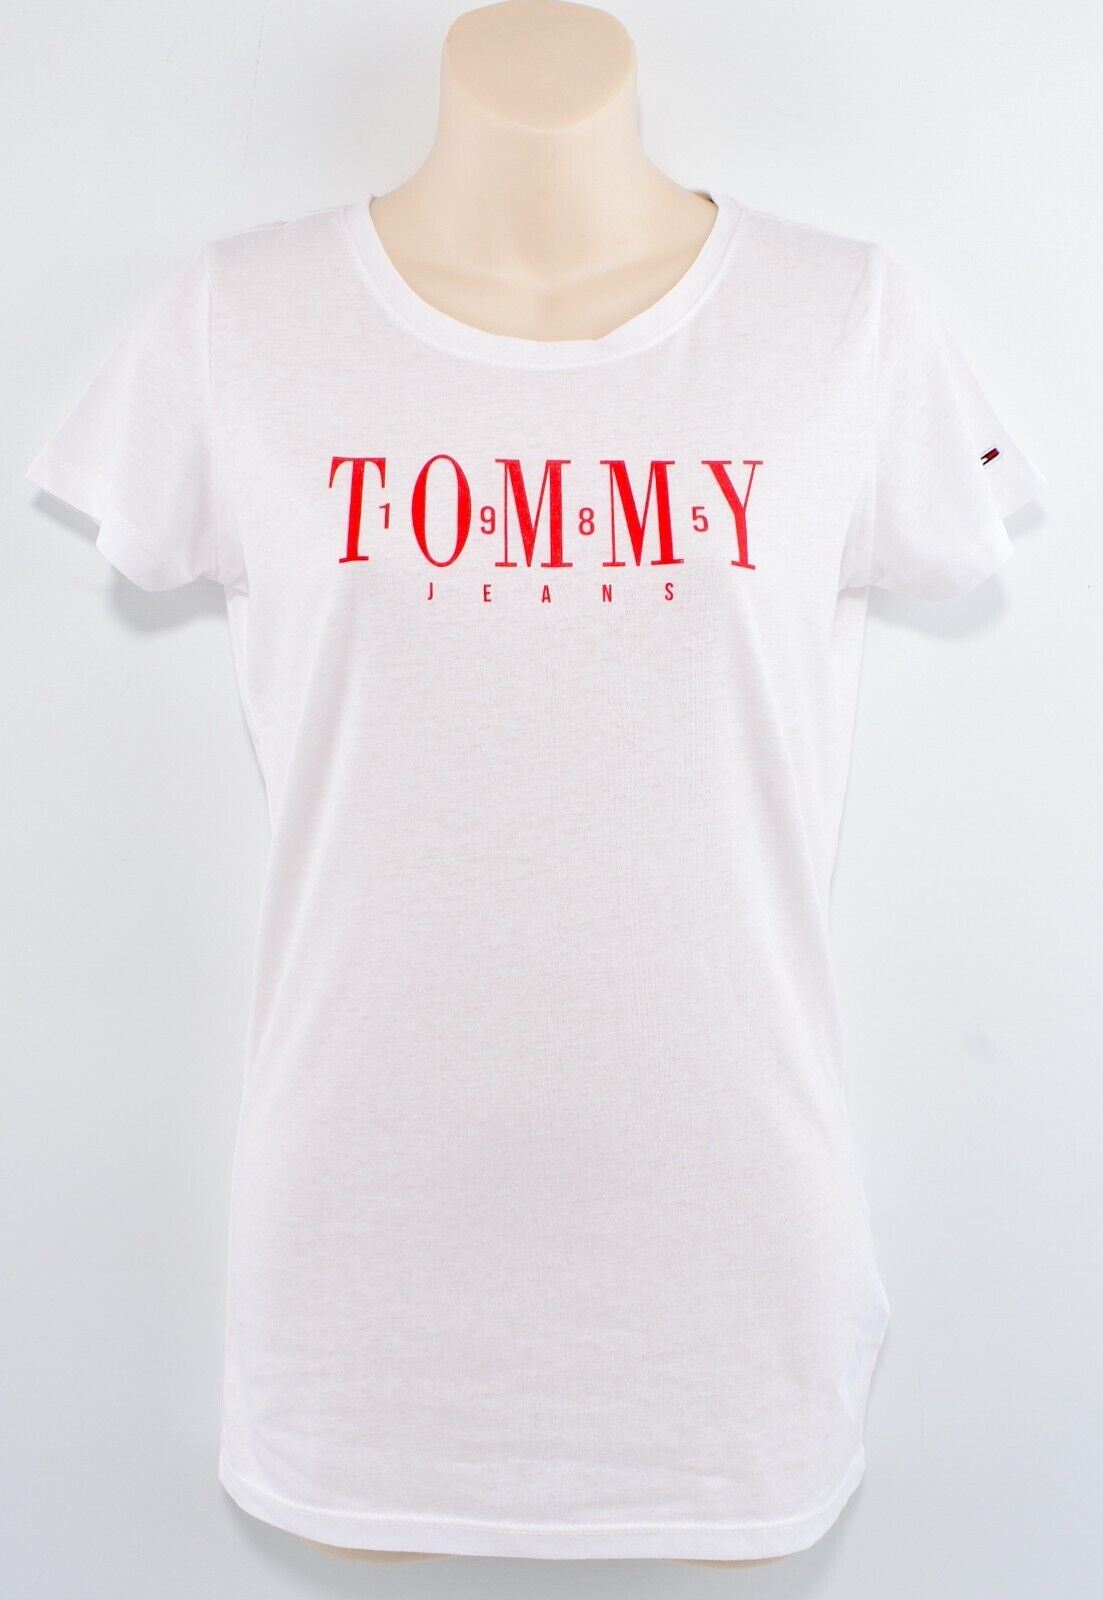 TOMMY HILFIGER - TOMMY JEANS Women's Slim Fit T-shirt, White, S /UK 10